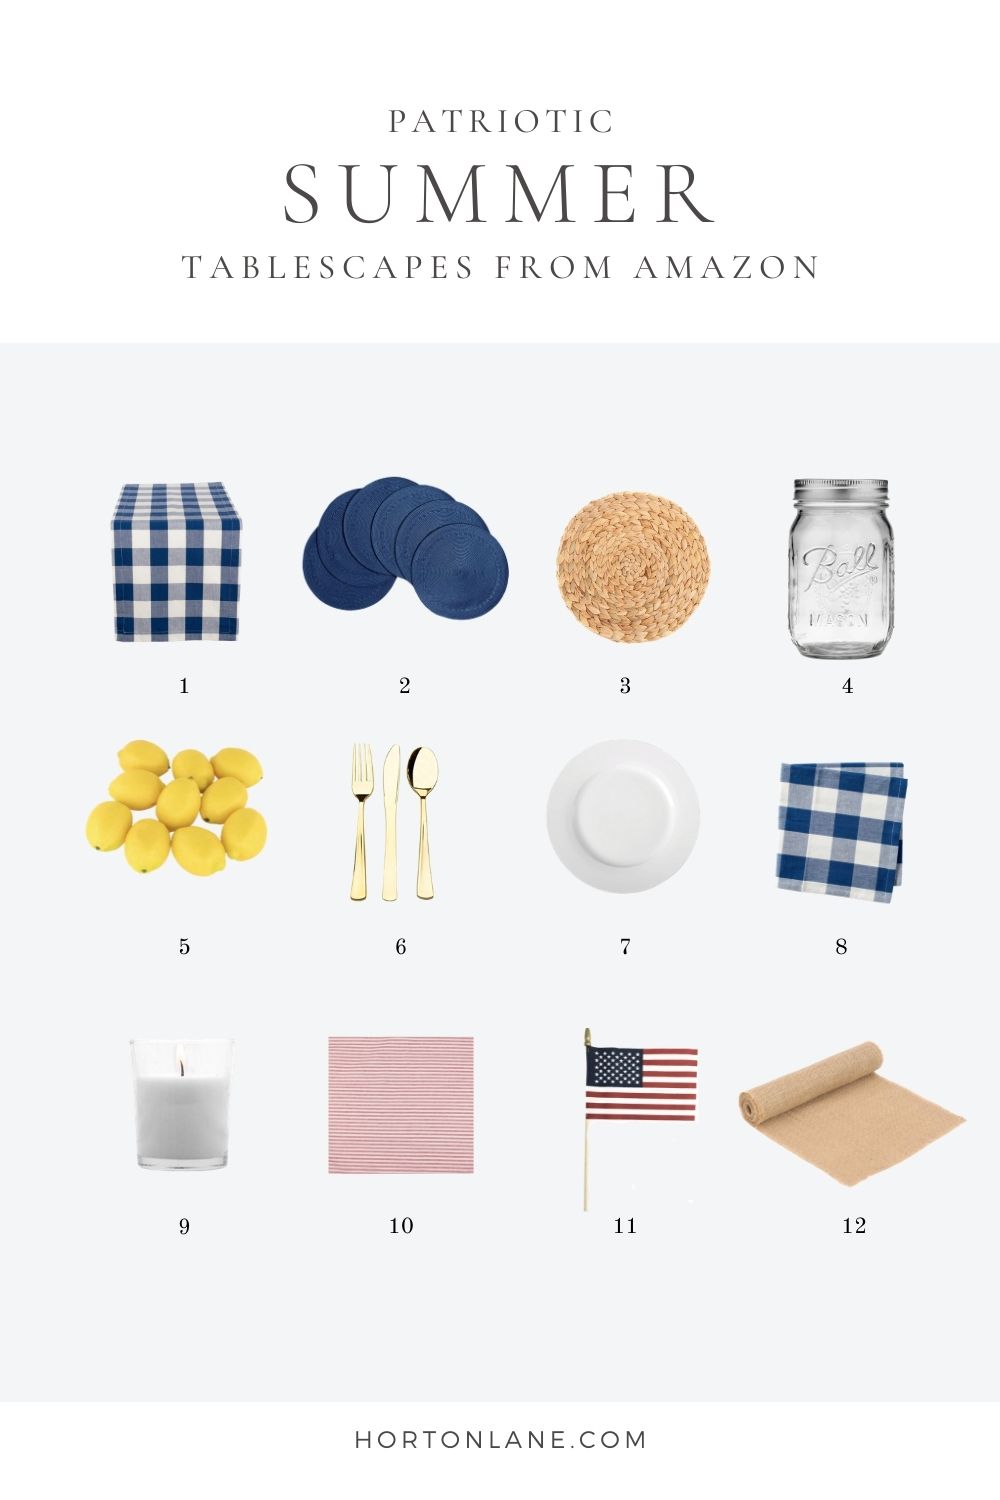 Pinterest Pins-Patriotic Summer Tablescapes from Amazon collage 4th of july memorial day table decor table setting